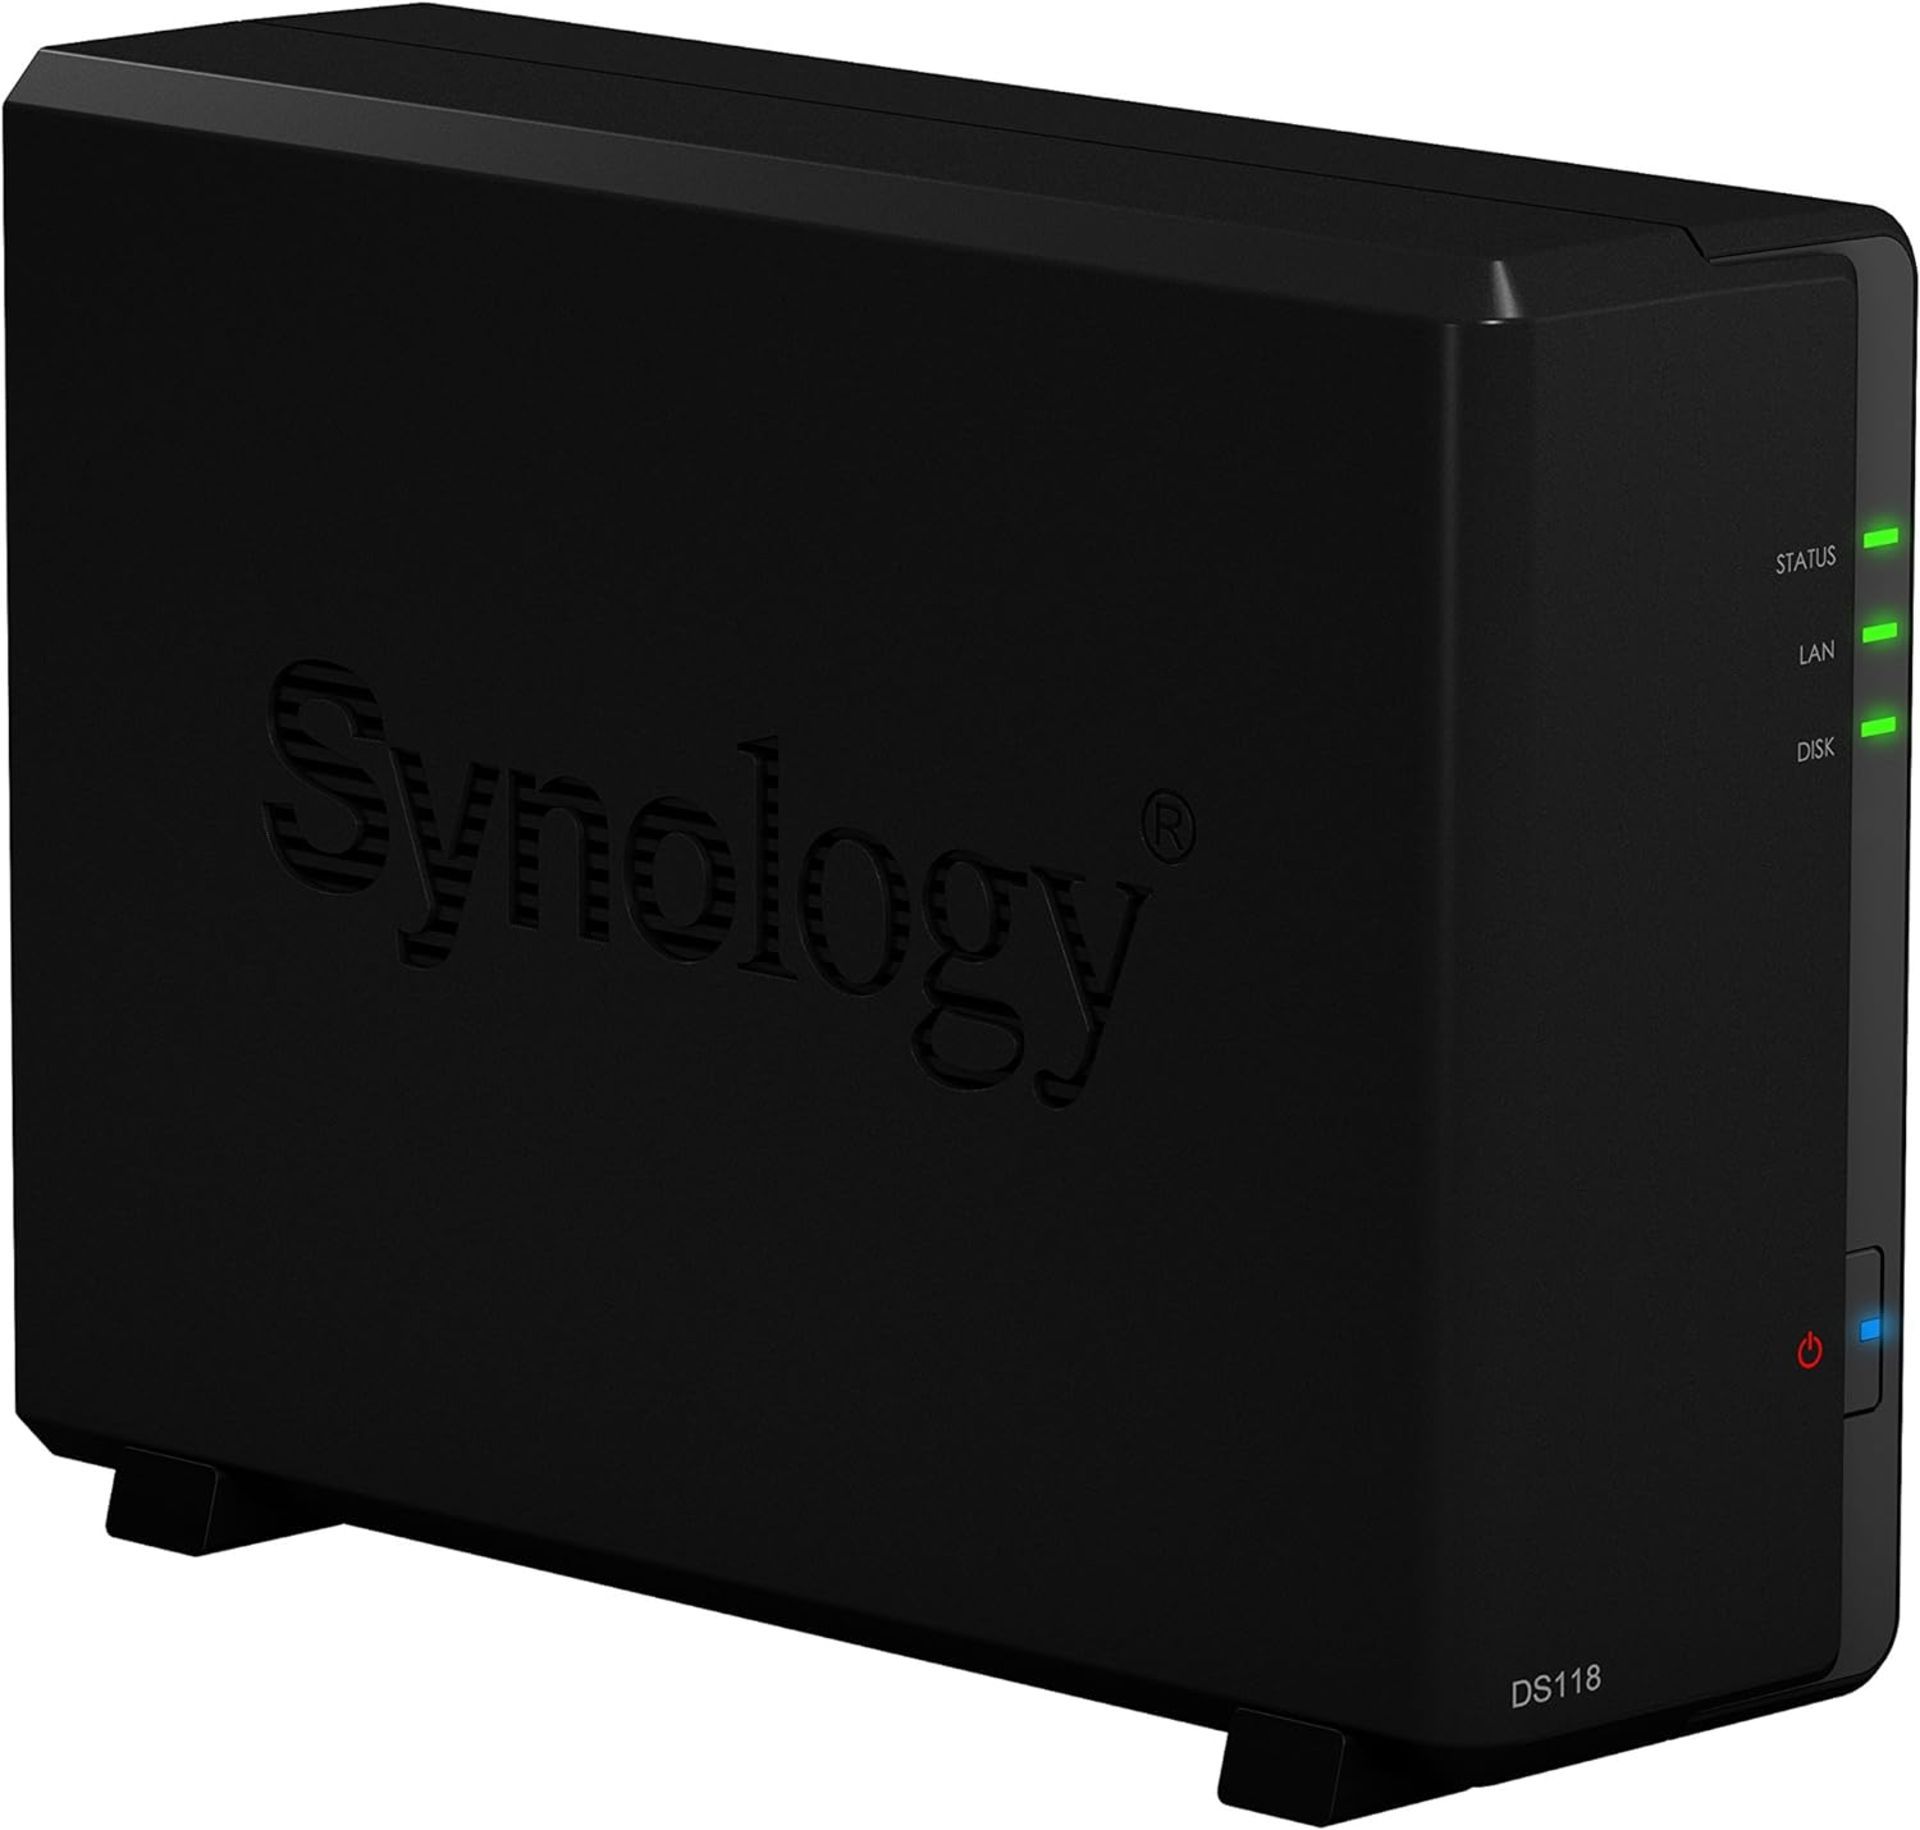 Brand New Synology DS118 1 Bay Desktop NAS Enclosure, High-performance 1-bay NAS for small offices - Bild 2 aus 3